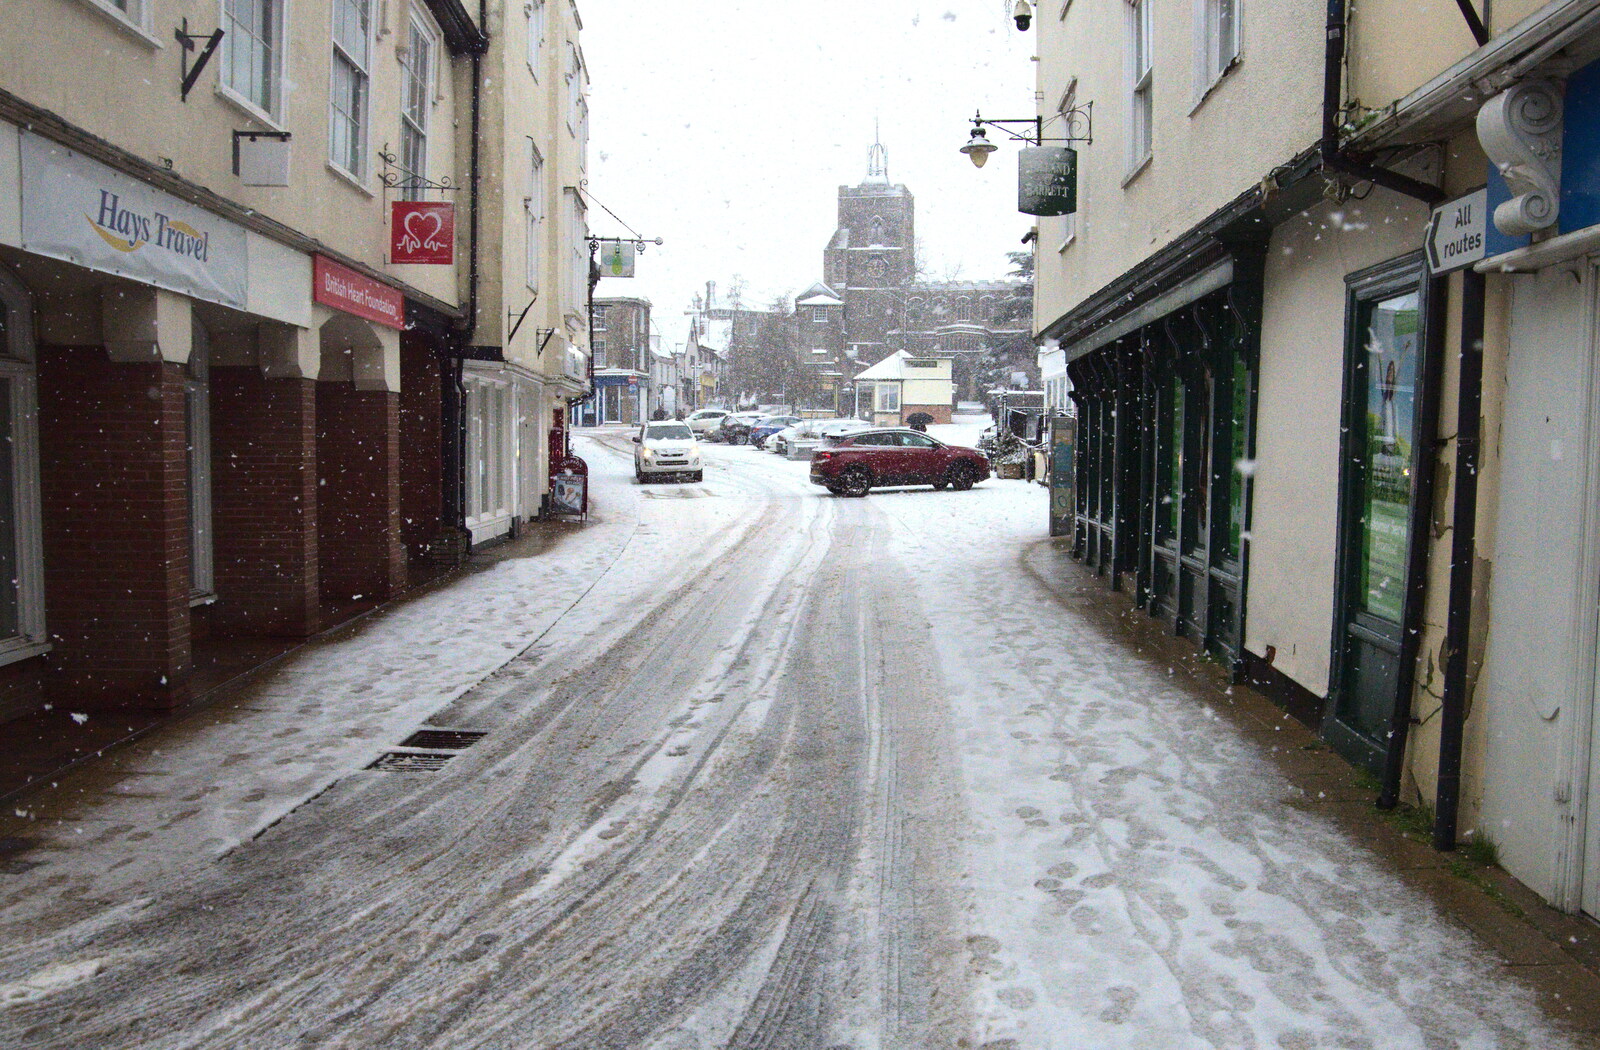 The top of Mere Street by Hays Travel from A Snowy Morning, Diss, Norfolk - 16th January 2021